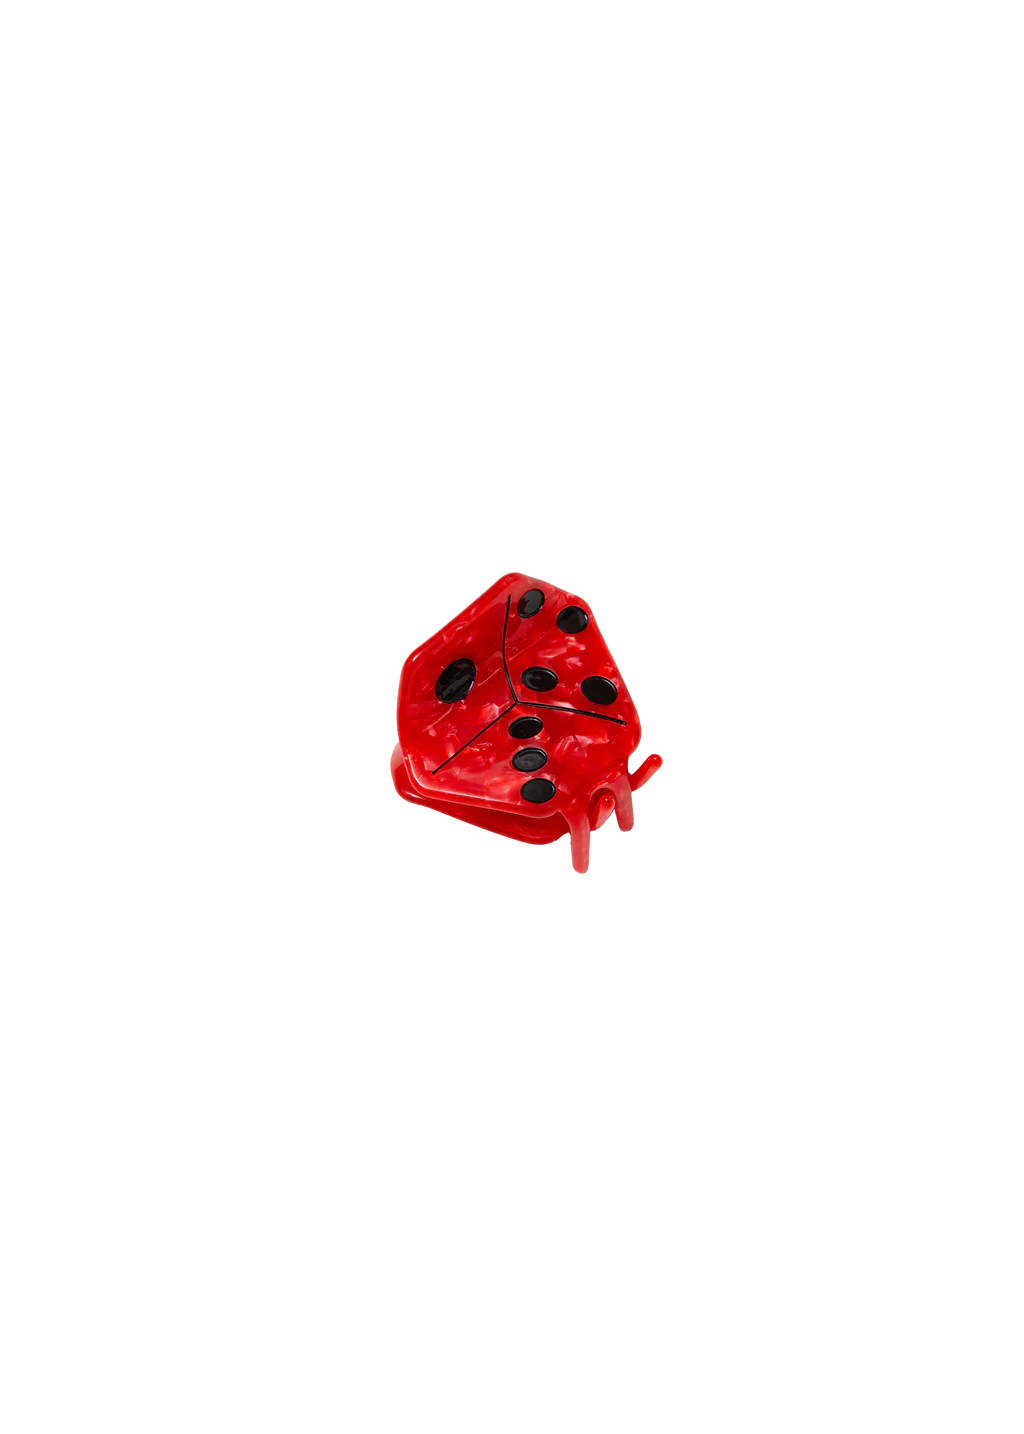 Dice Hair Claw - Red